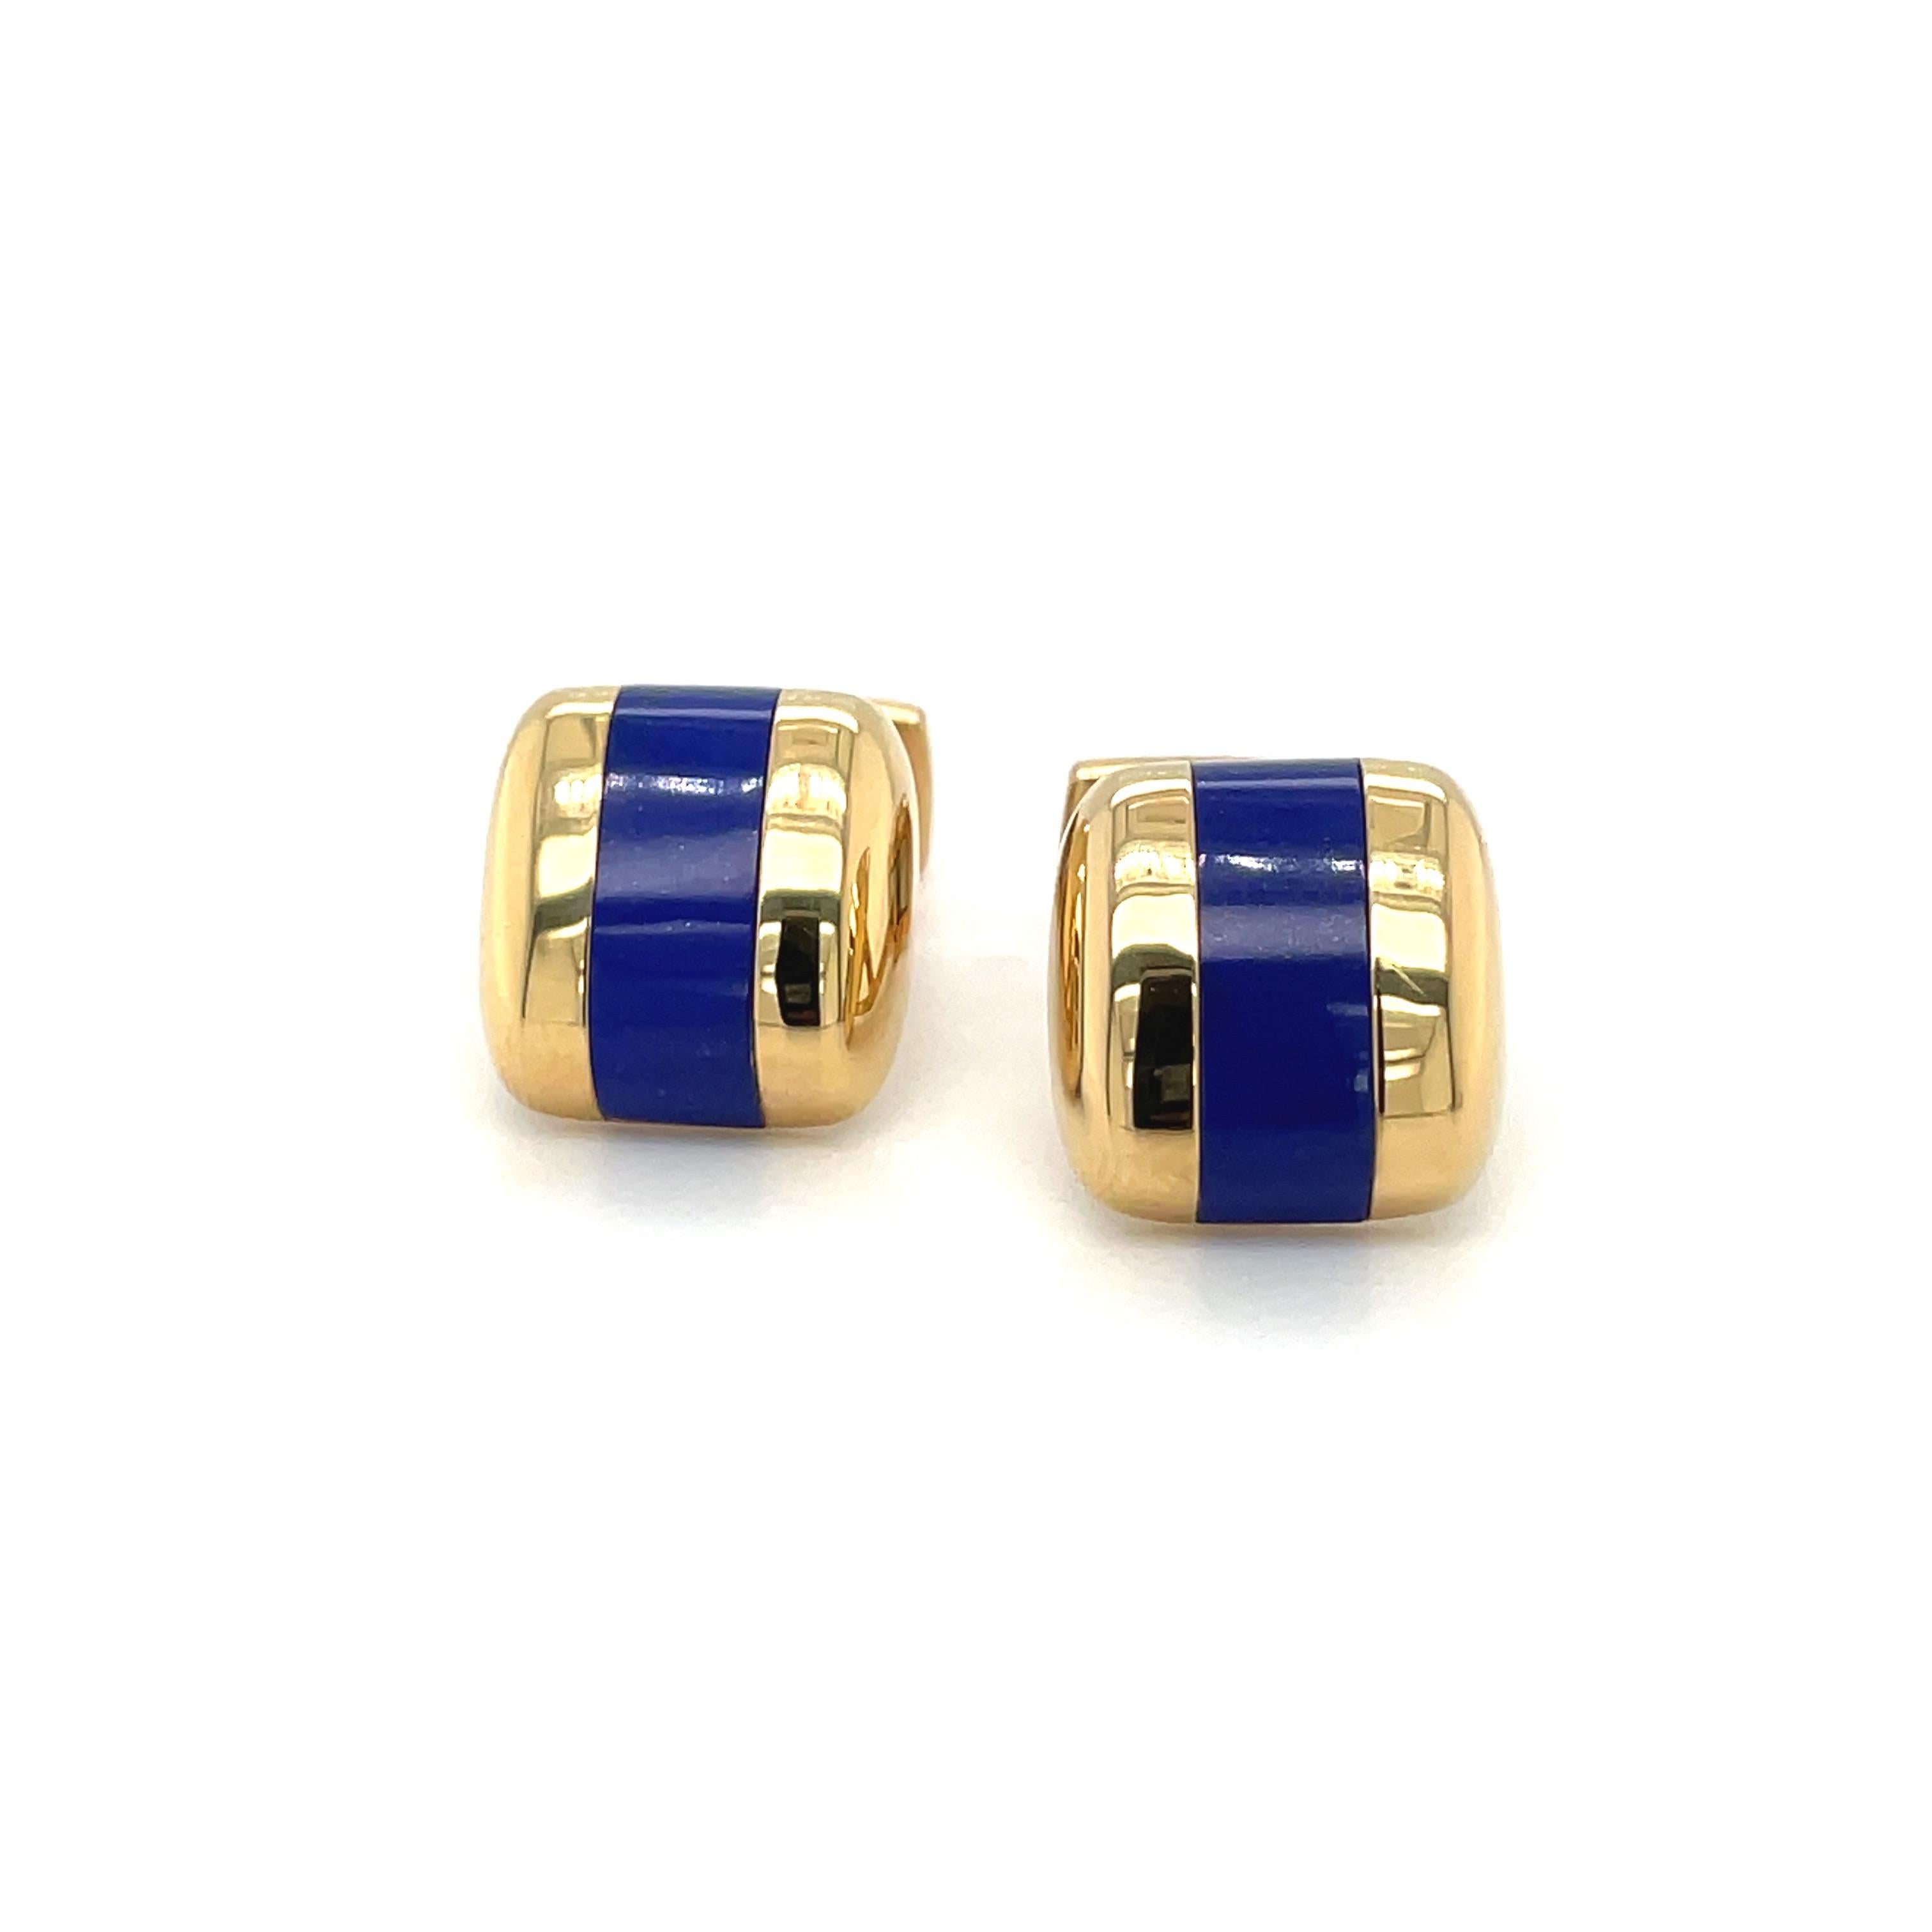 Elegant pillow shaped 18 karat yellow gold cuff links. Crafted in a high polished yellow gold with an inlaid lapis lazuli center. The  bar back style cuff links measure 15.8 x 15 x 5.5 mm.
Stamped Germany 18K